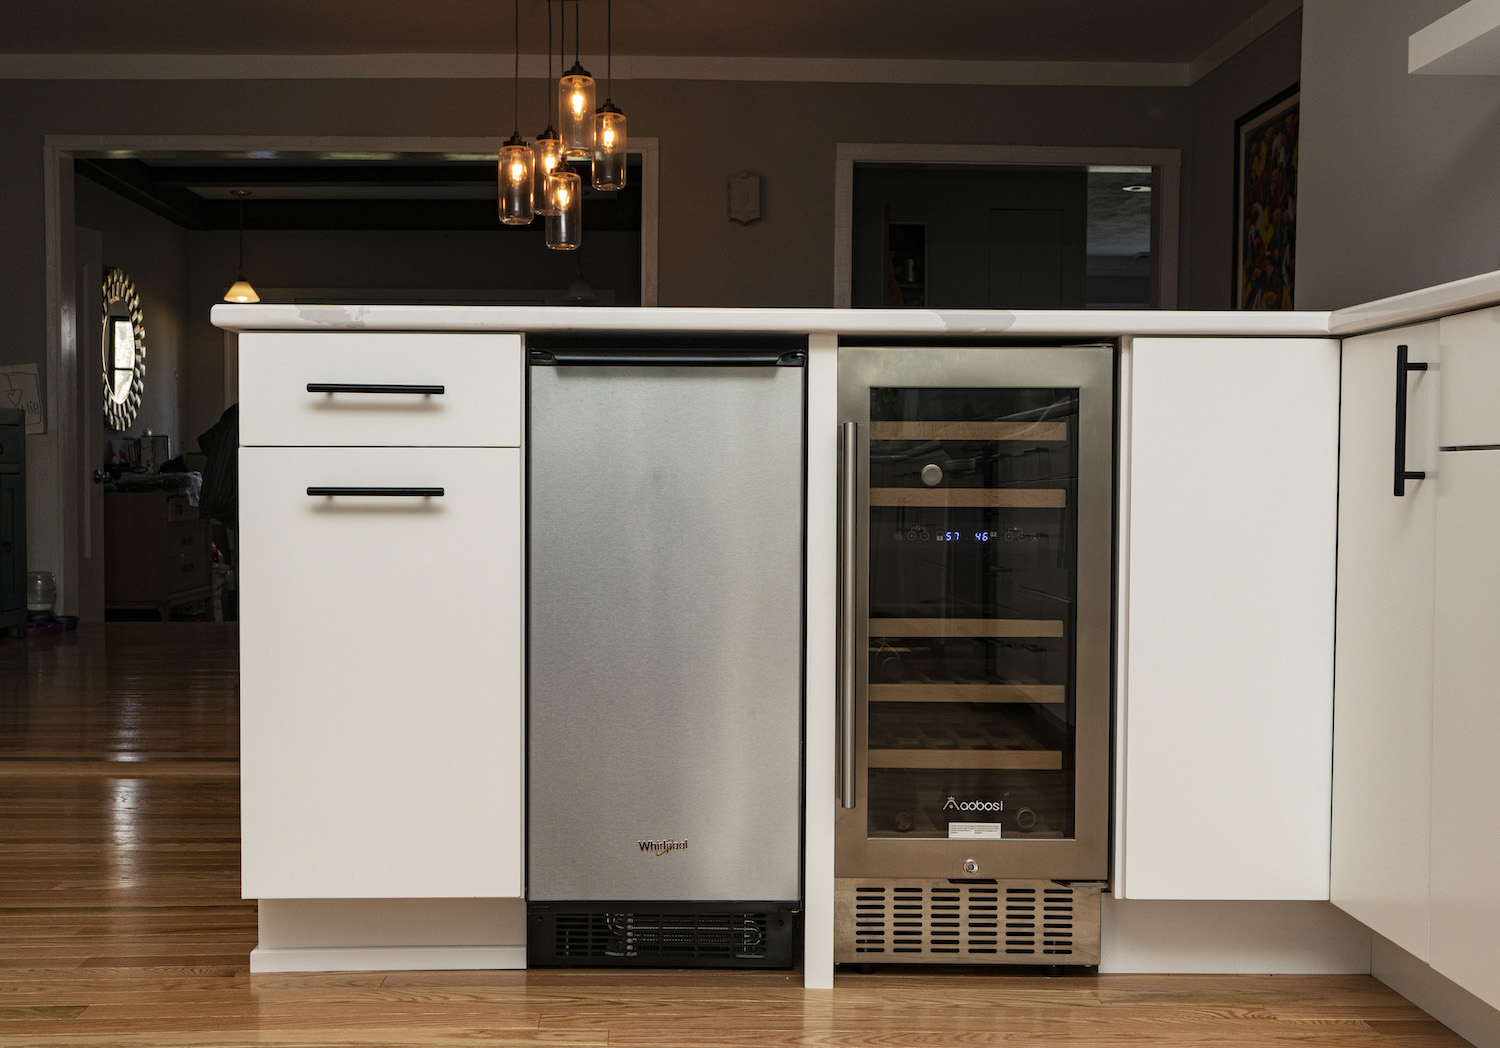 trash press and wine cooler built into kitchen